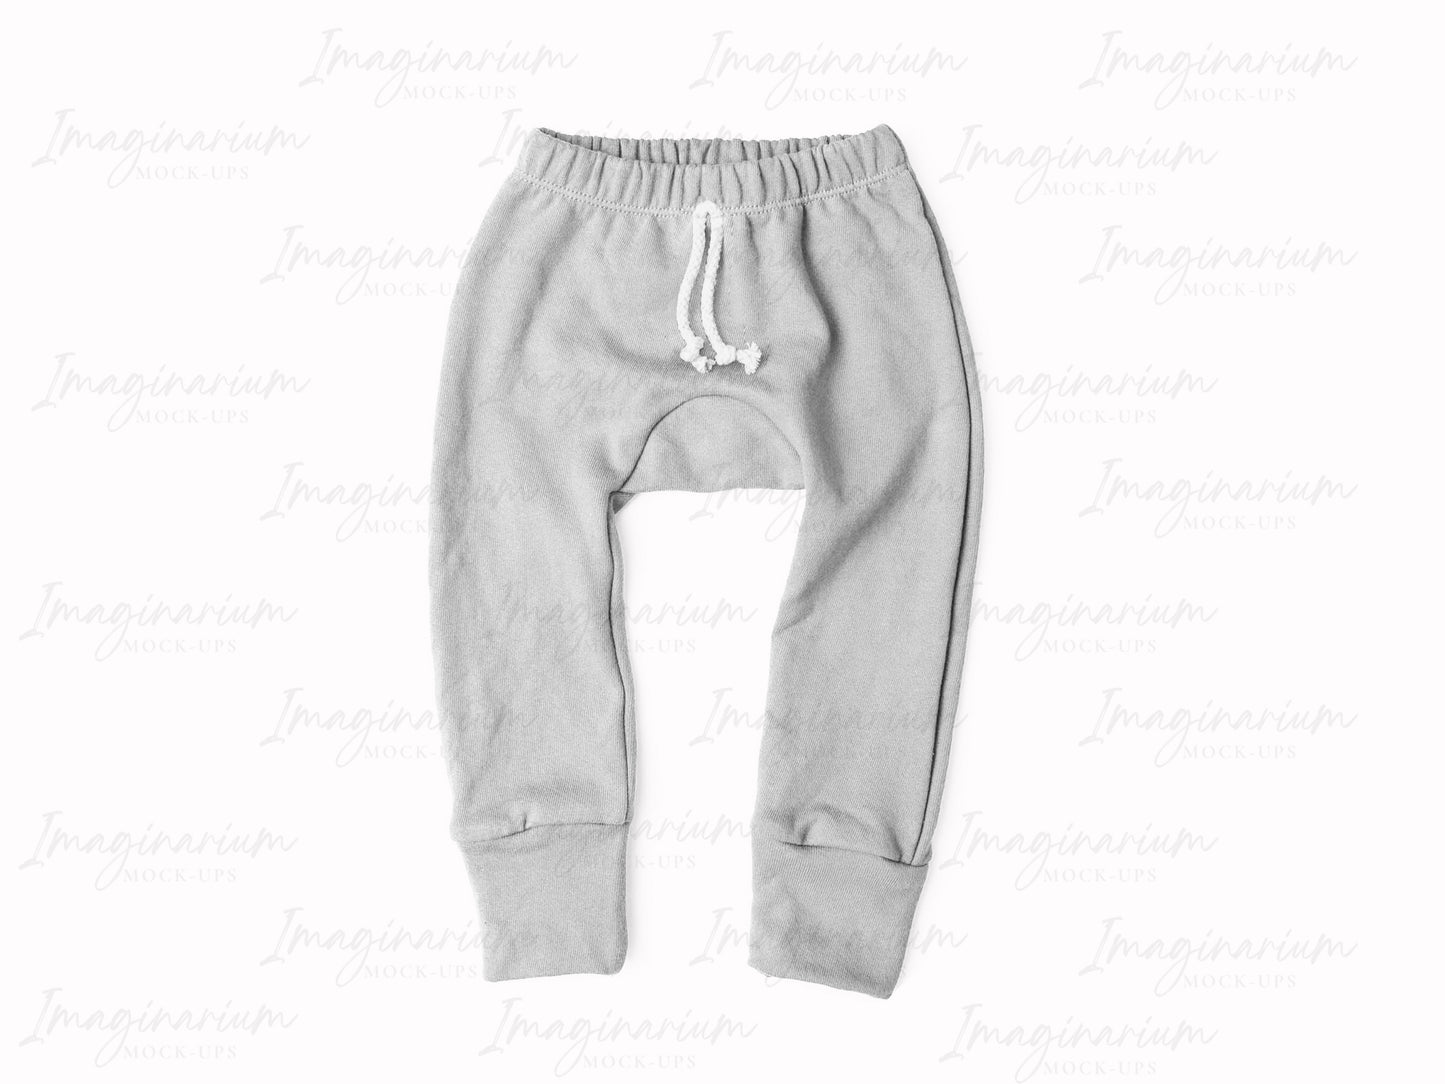 Gus & Steel Comfy Pants Mock Up, Realistic Clothing Mockup for Photoshop and Procreate